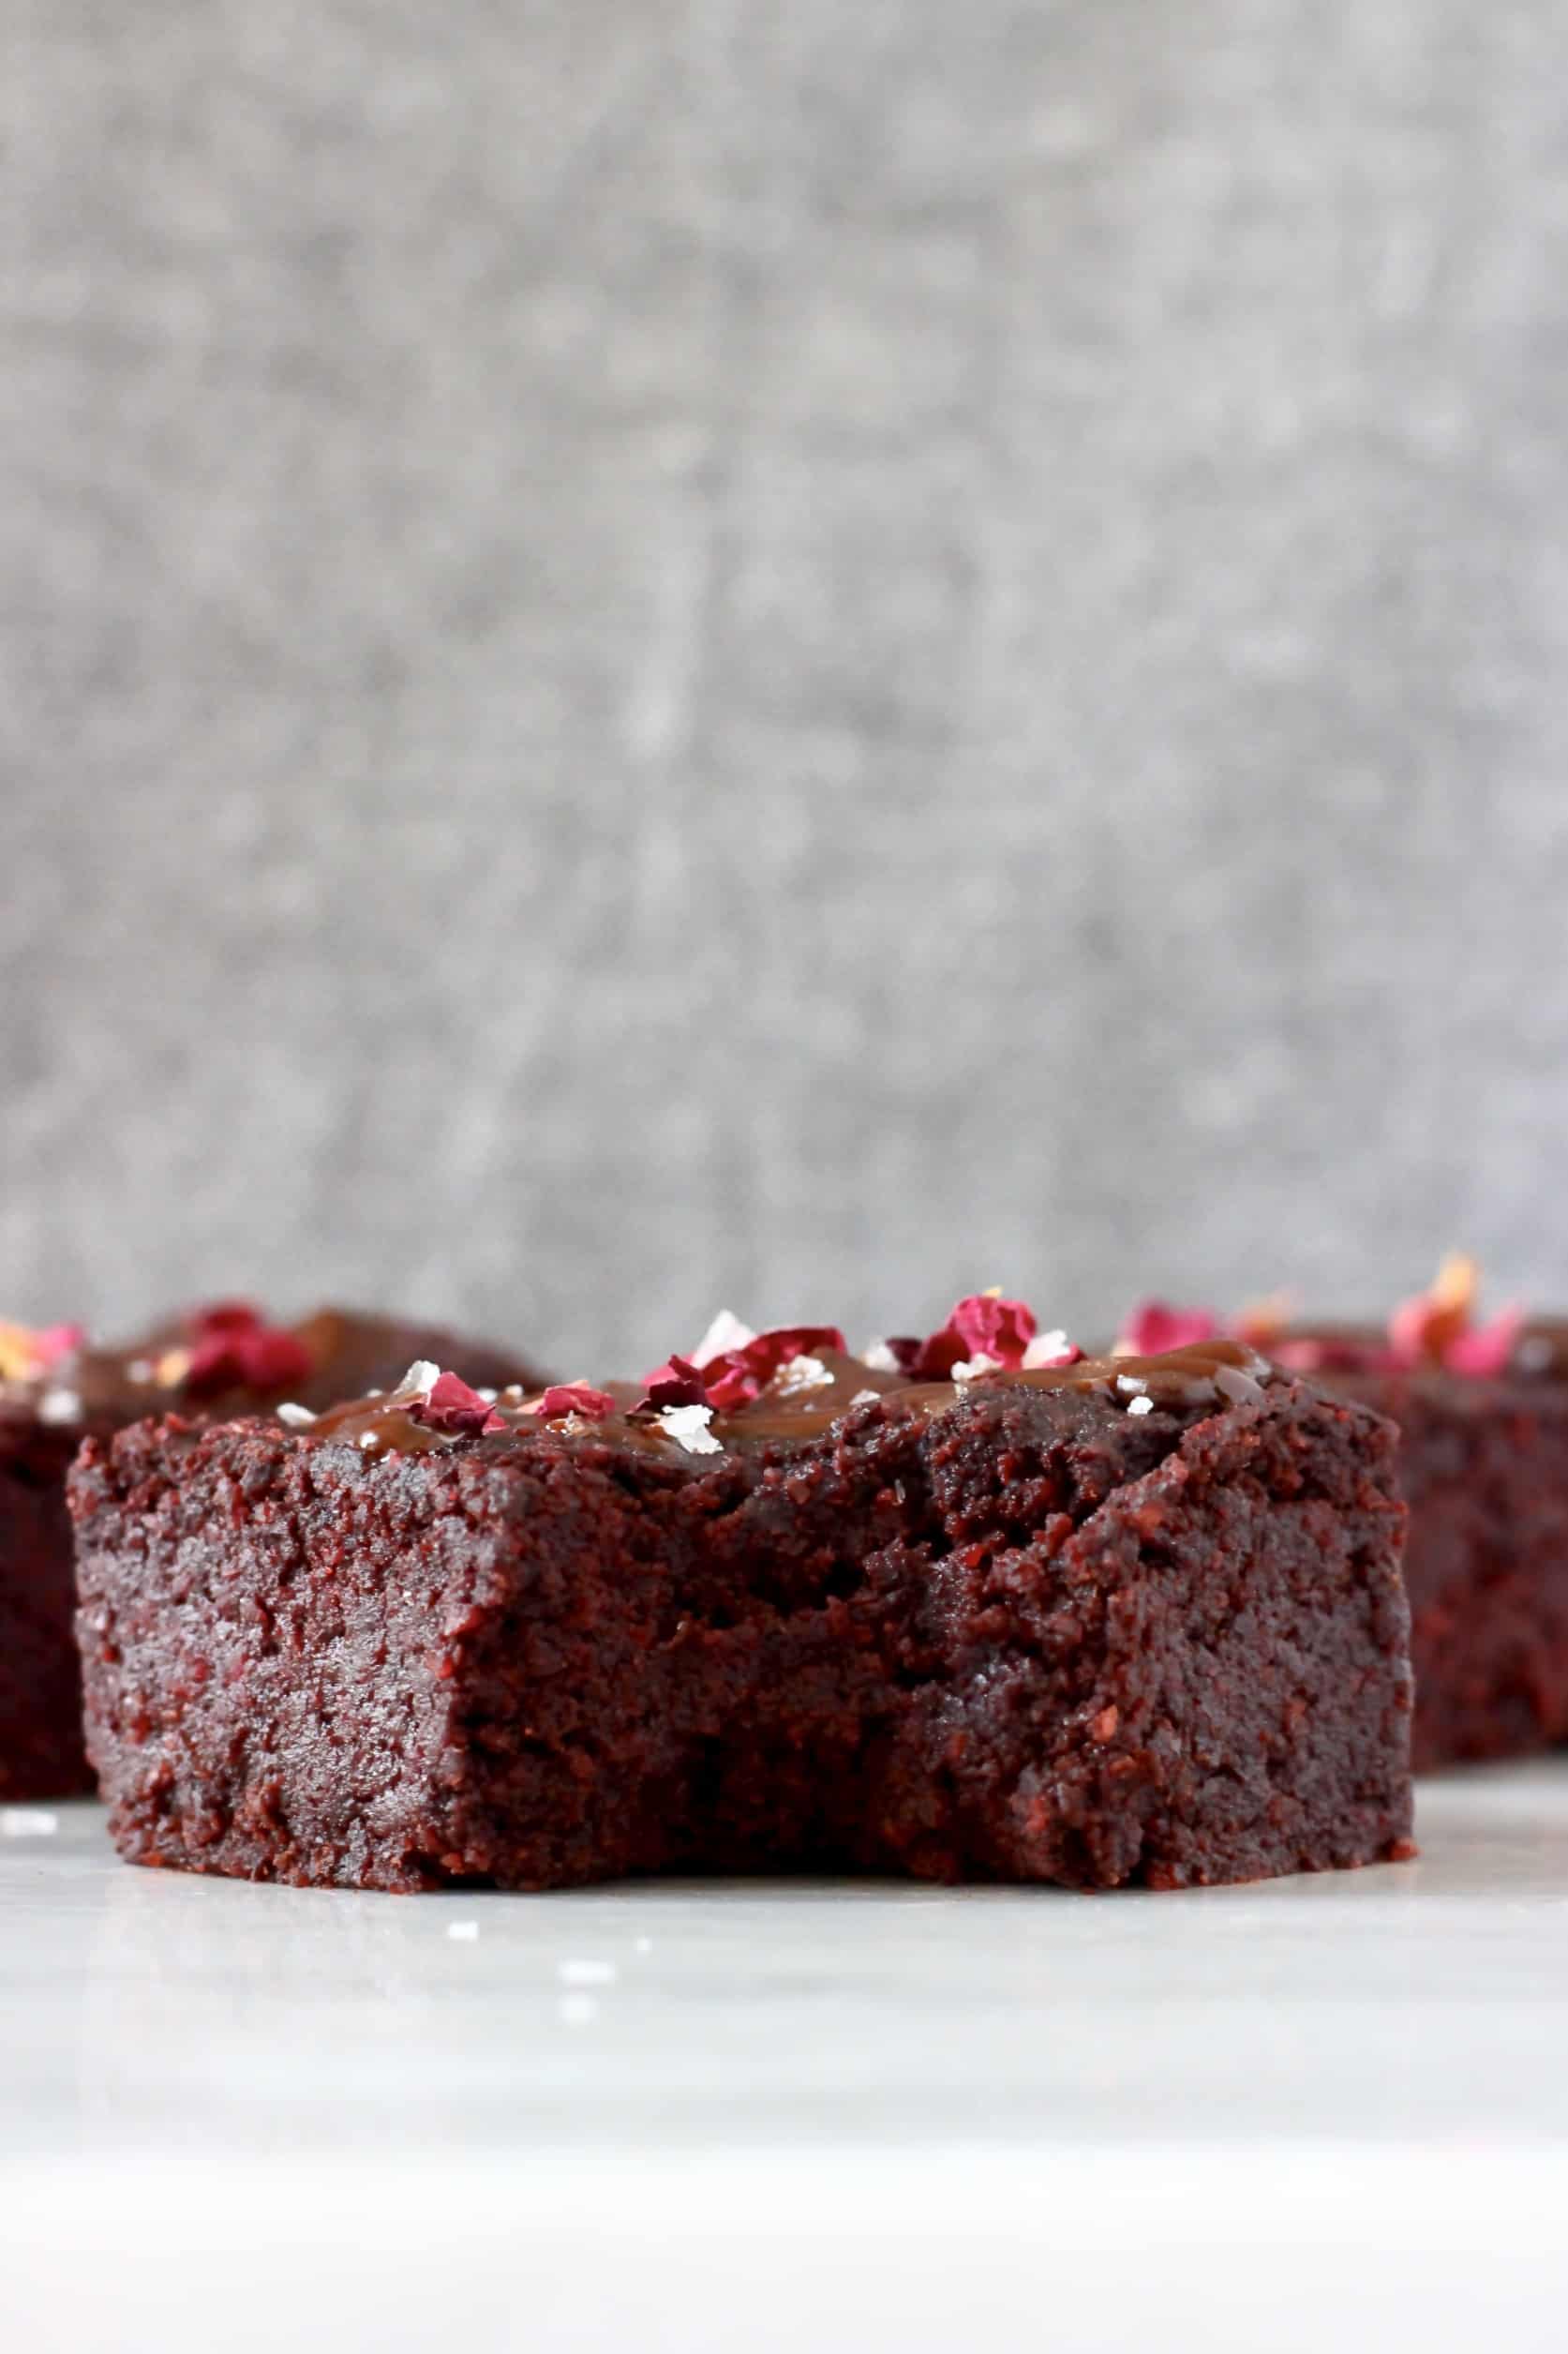 Three beetroot brownies with chocolate frosting and rose petals with a bite taken out of one